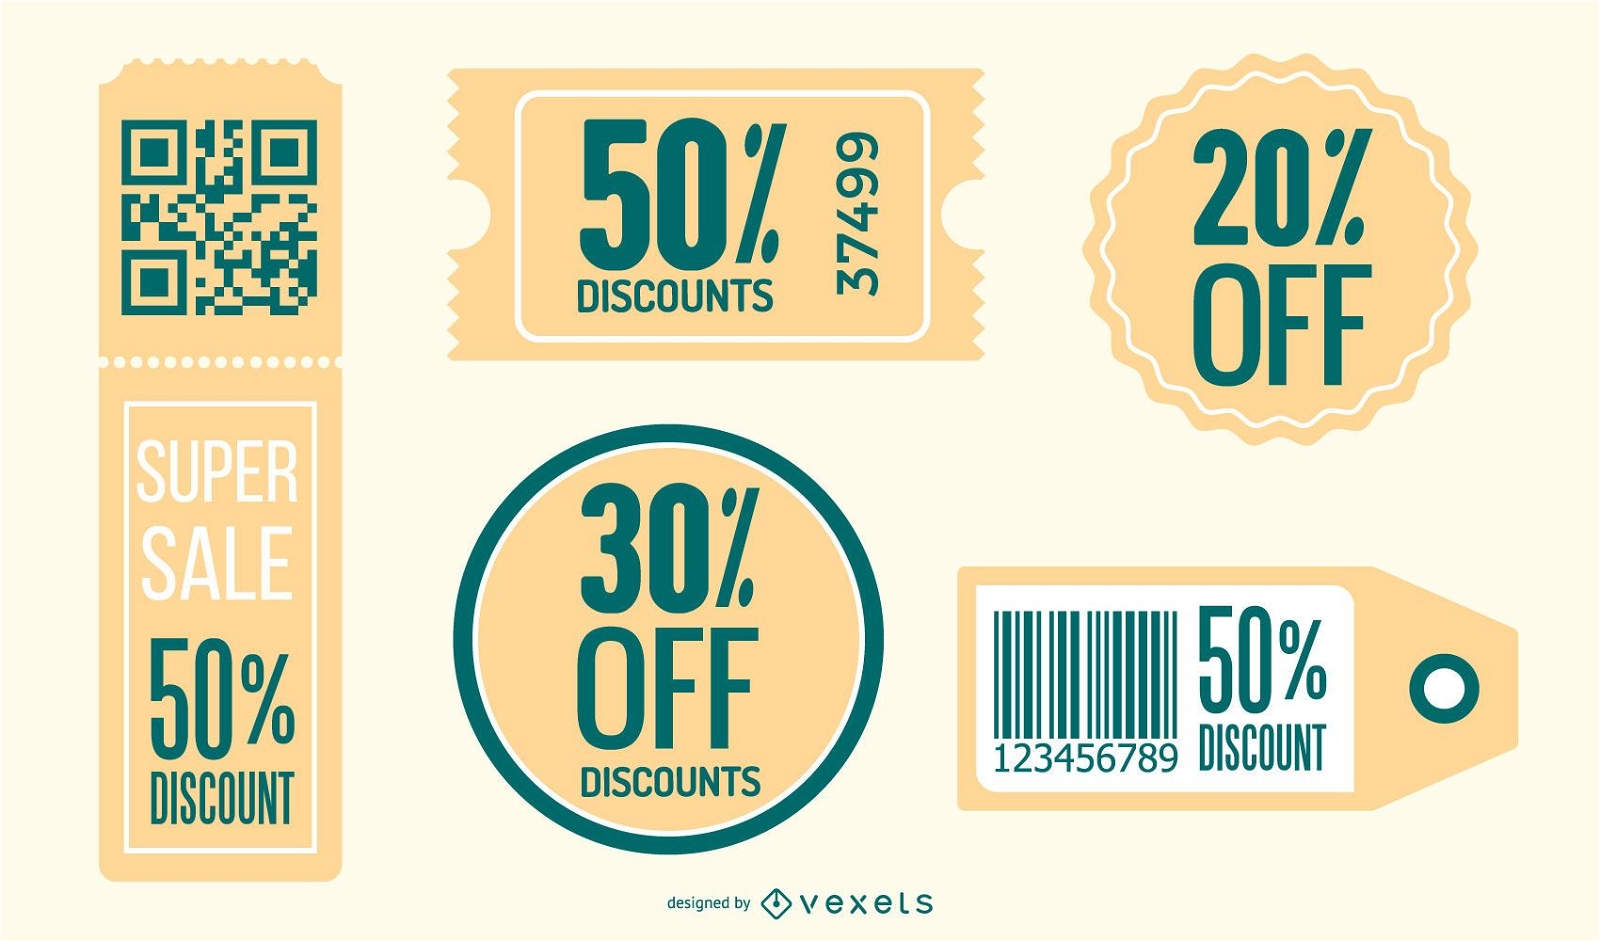 Retro Style Discount Coupon Pack